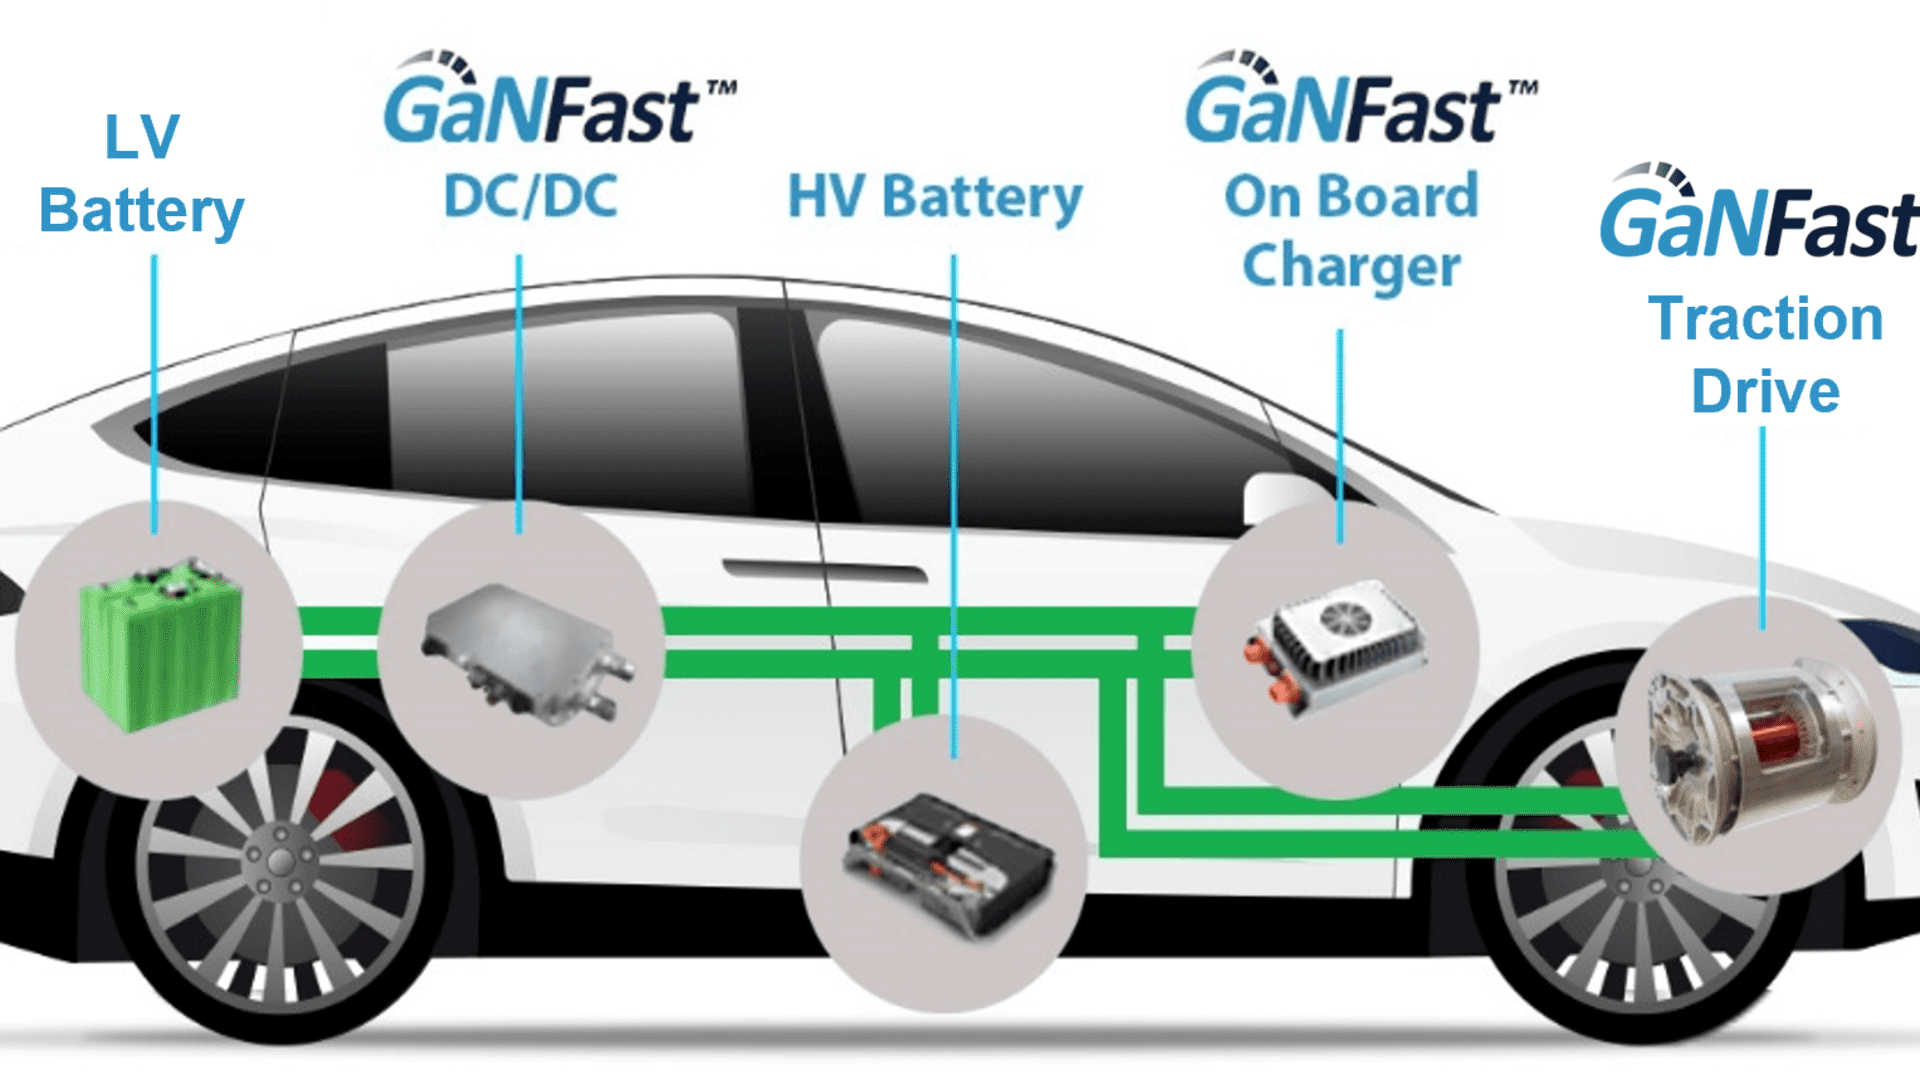 This graphic from Navitas Semiconductor shows where the GaN technology can make an electric vehicle more efficient.